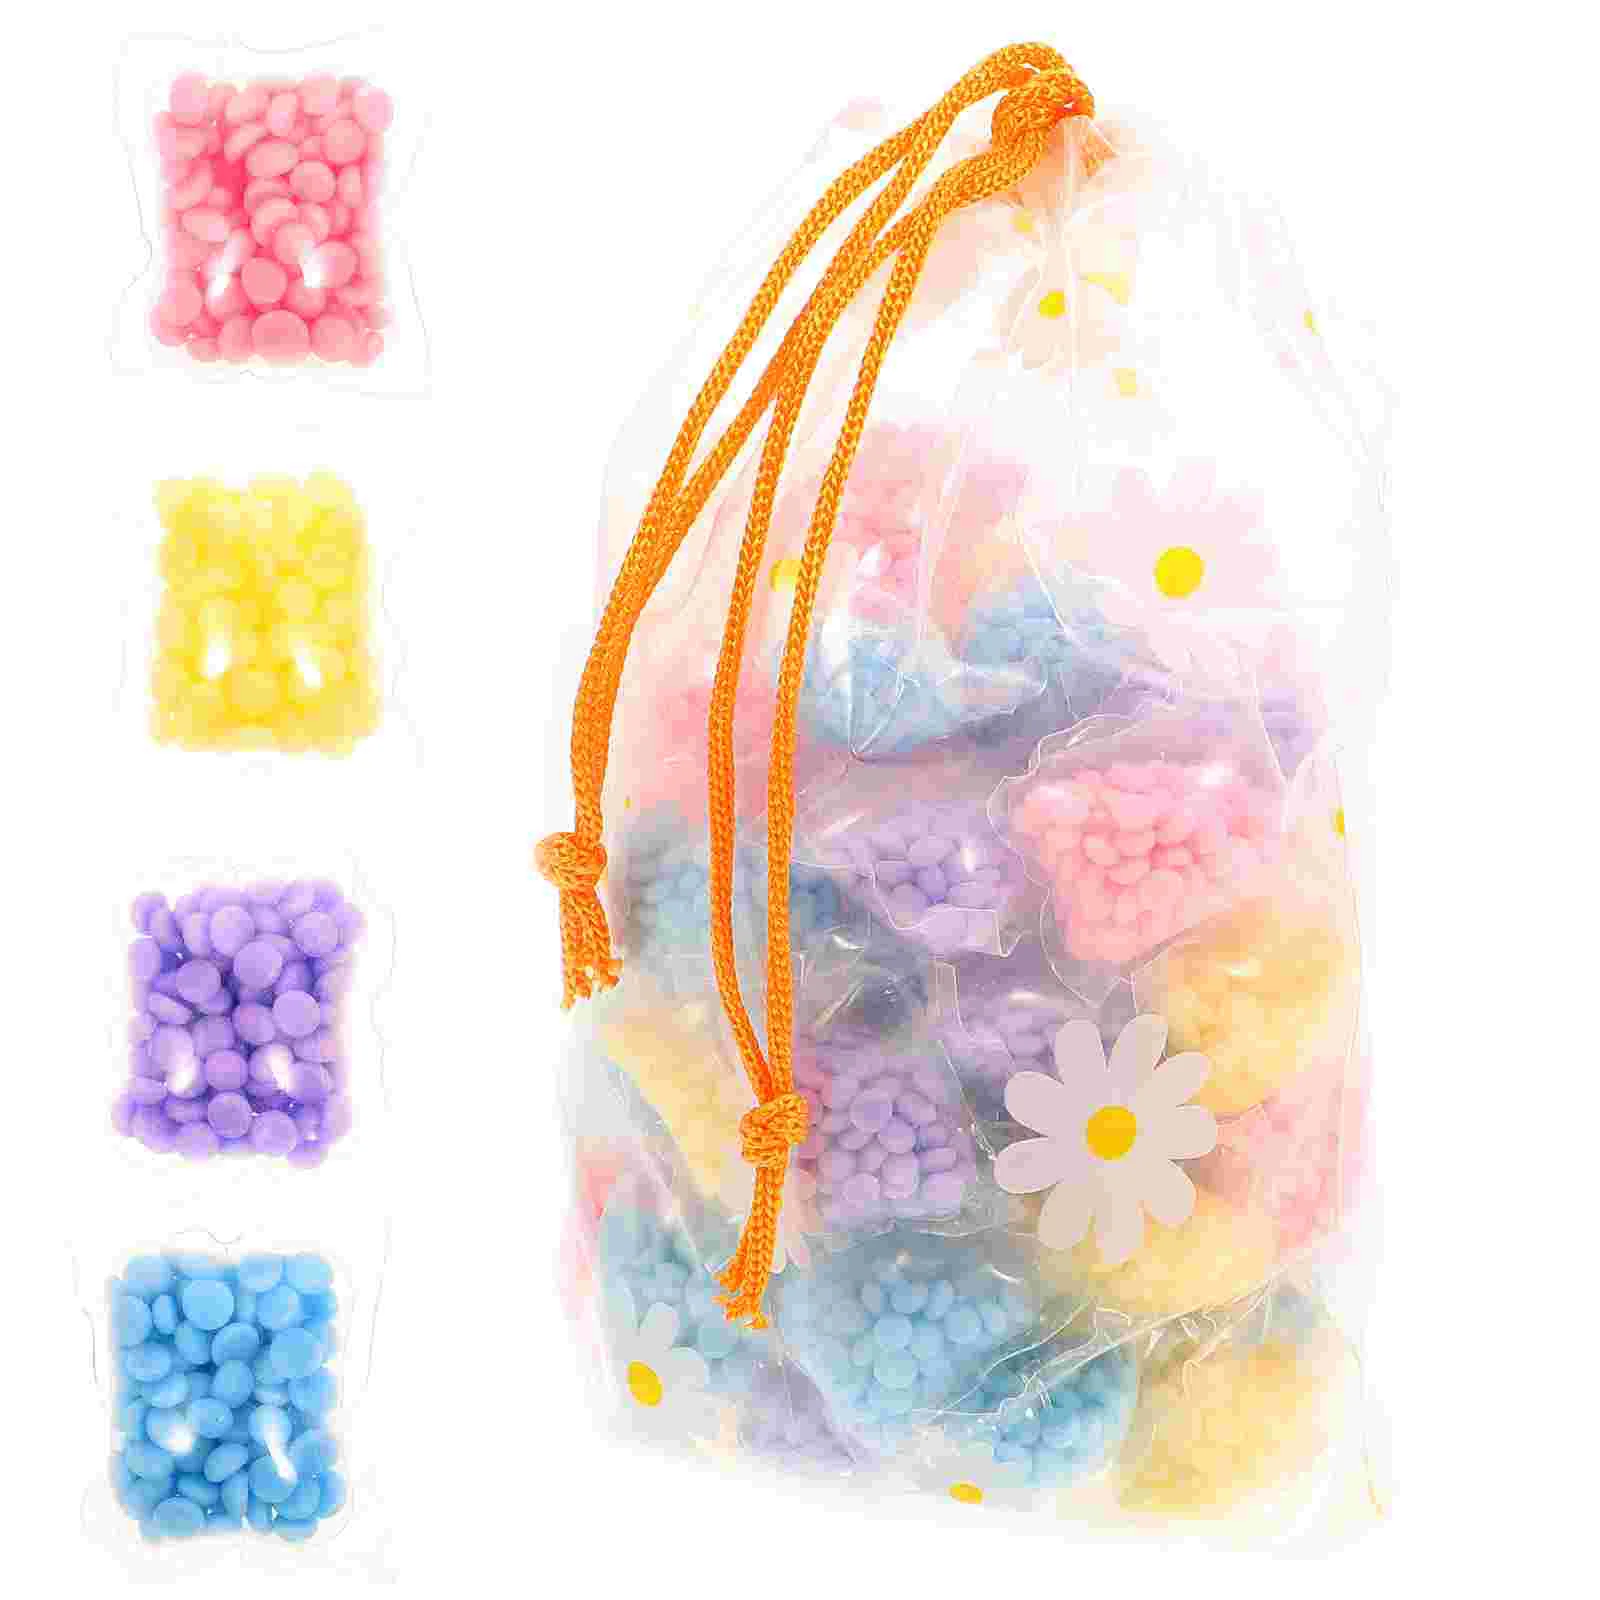 

Beads Laundry Booster Scent Washing Clothes Washer Detergent Bead Fabric Fragrance Cleaning Machine Softener Freshener Wash